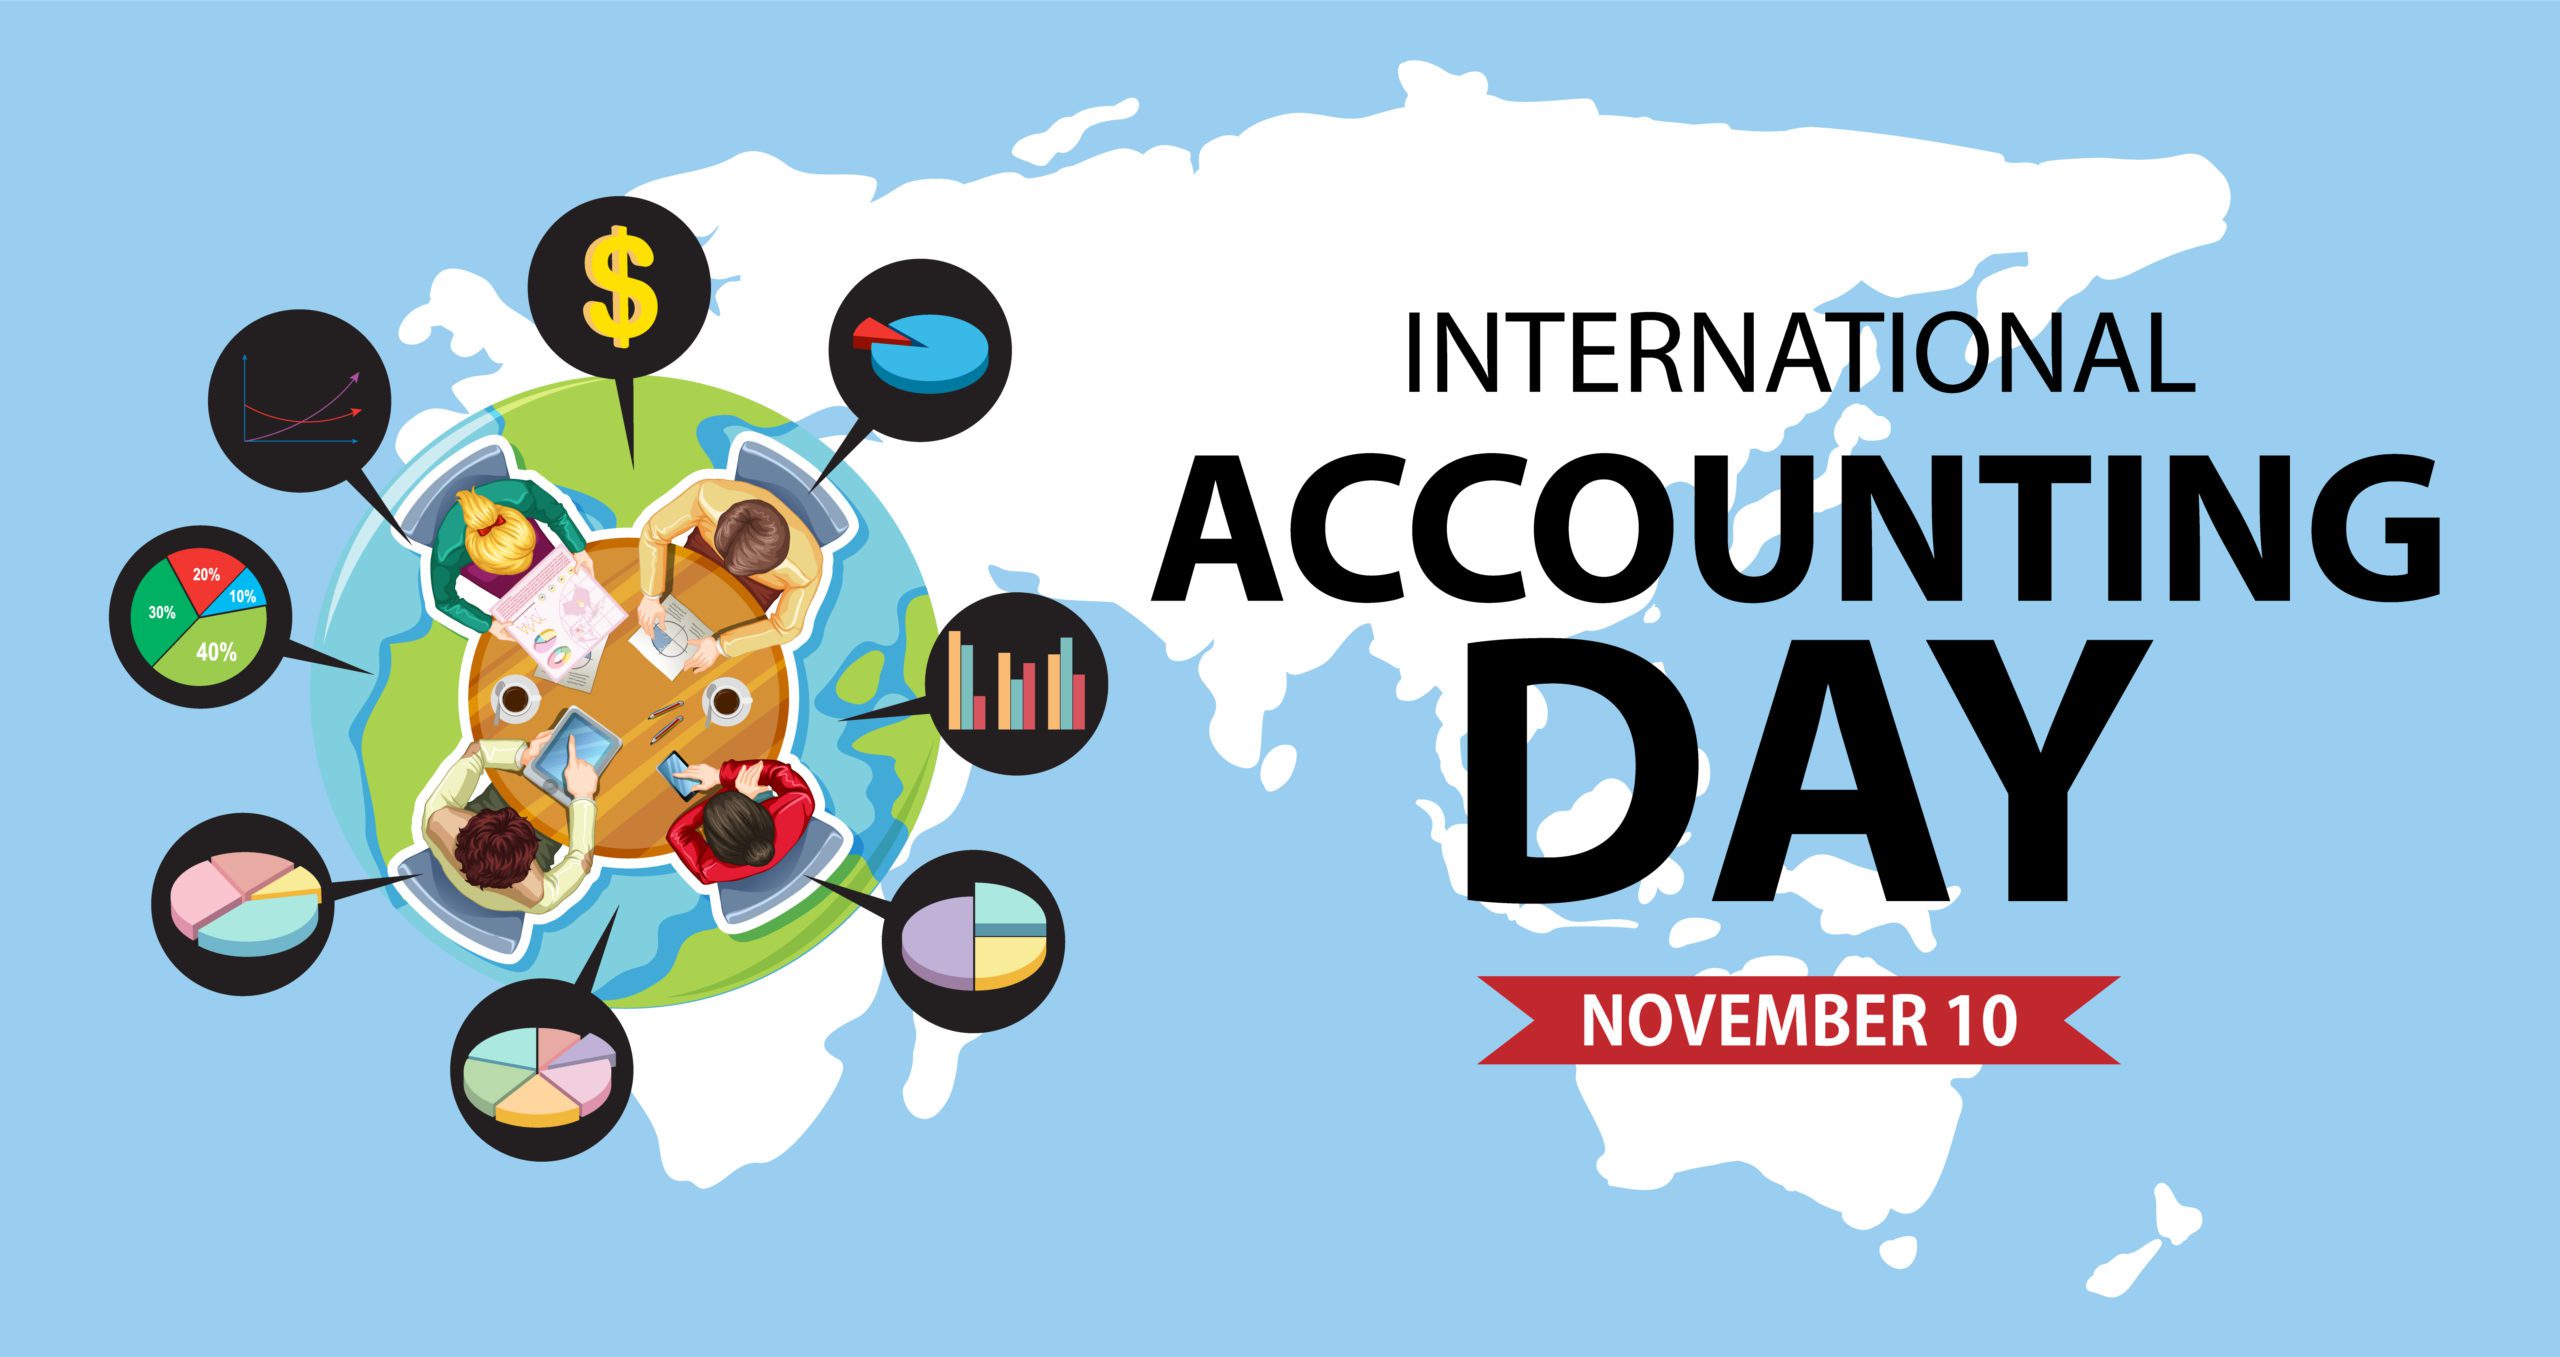 Image about Accountant day celebrated worldwide.